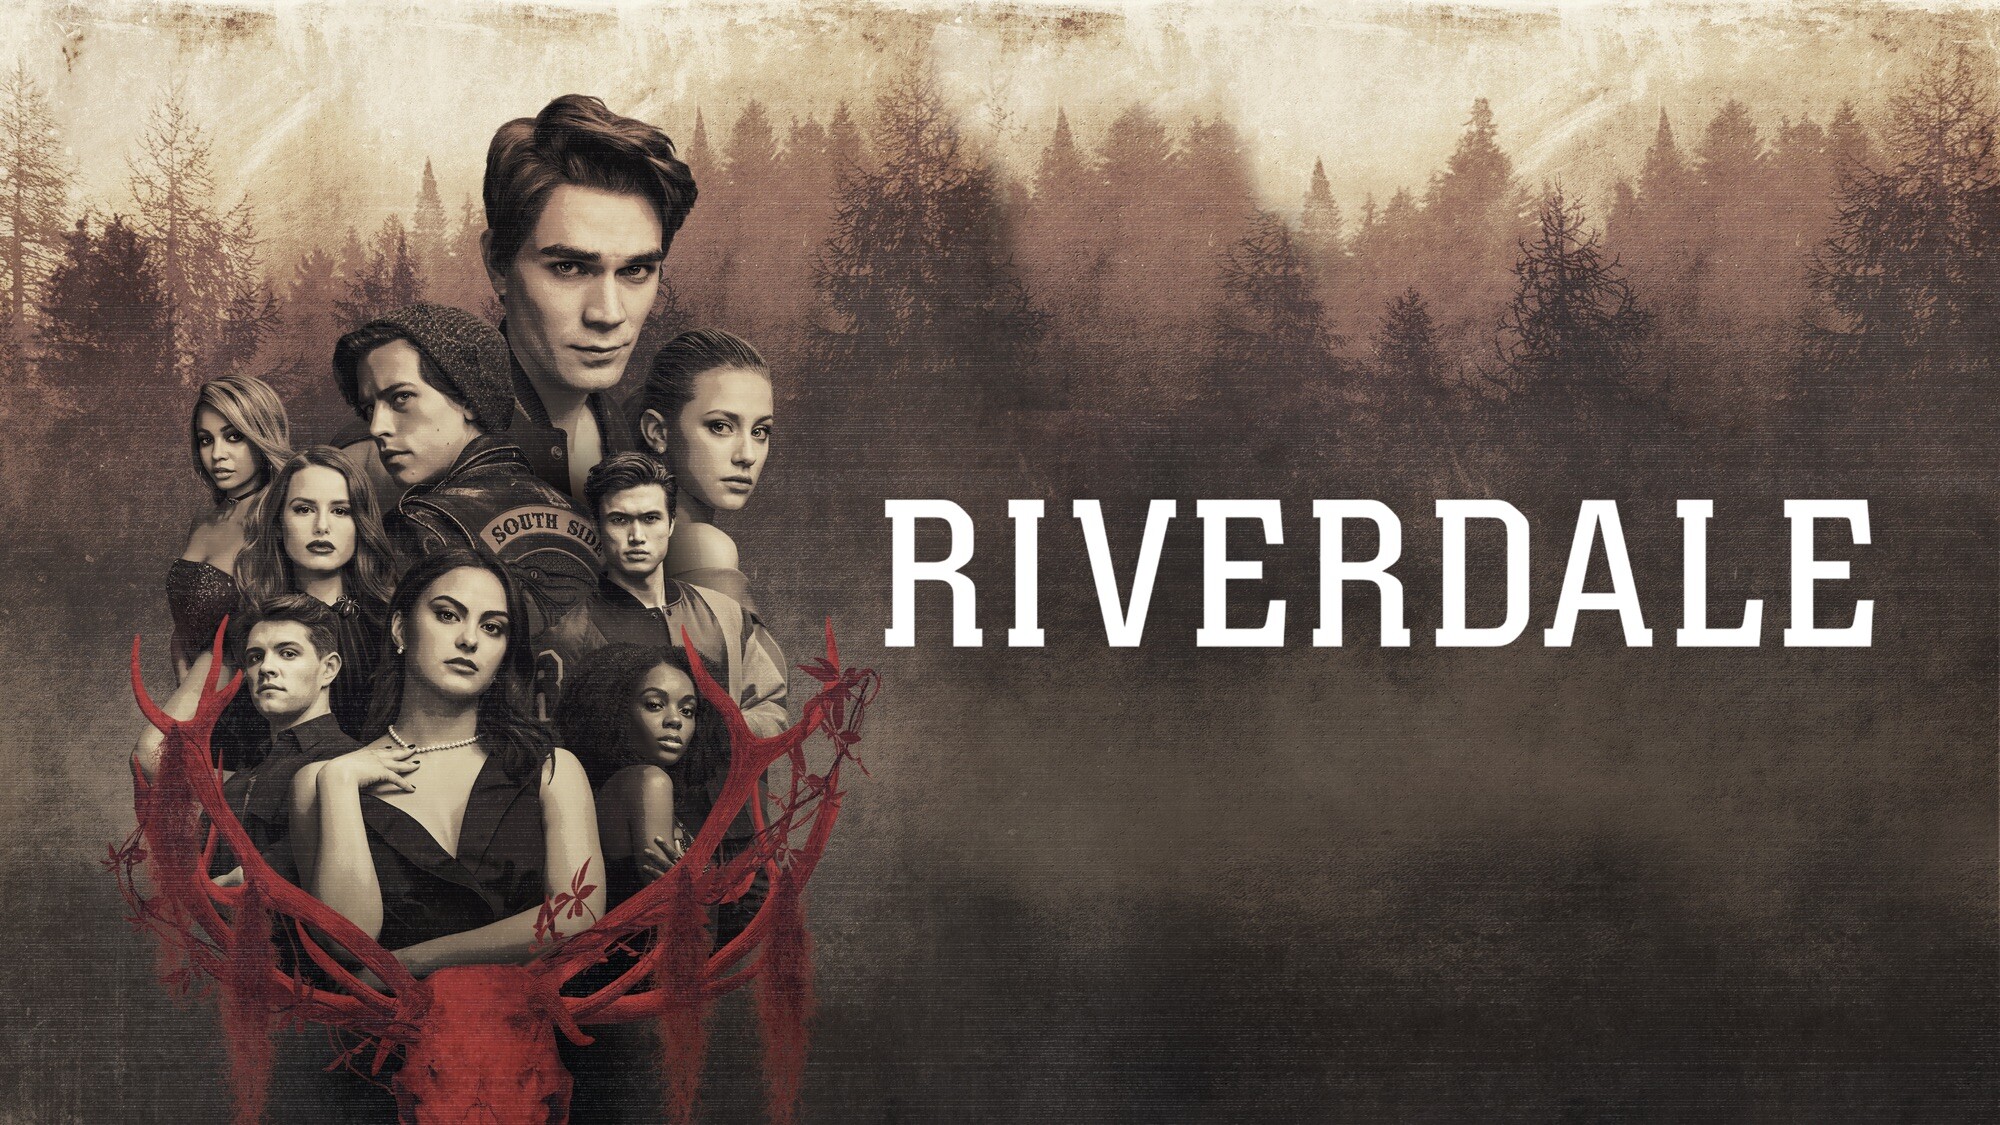 Riverdale (TV Series): South Side, KJ Apa as Archie Andrews, Camila Mendes as Veronica Lodge, Mystery teen drama. 2000x1130 HD Background.